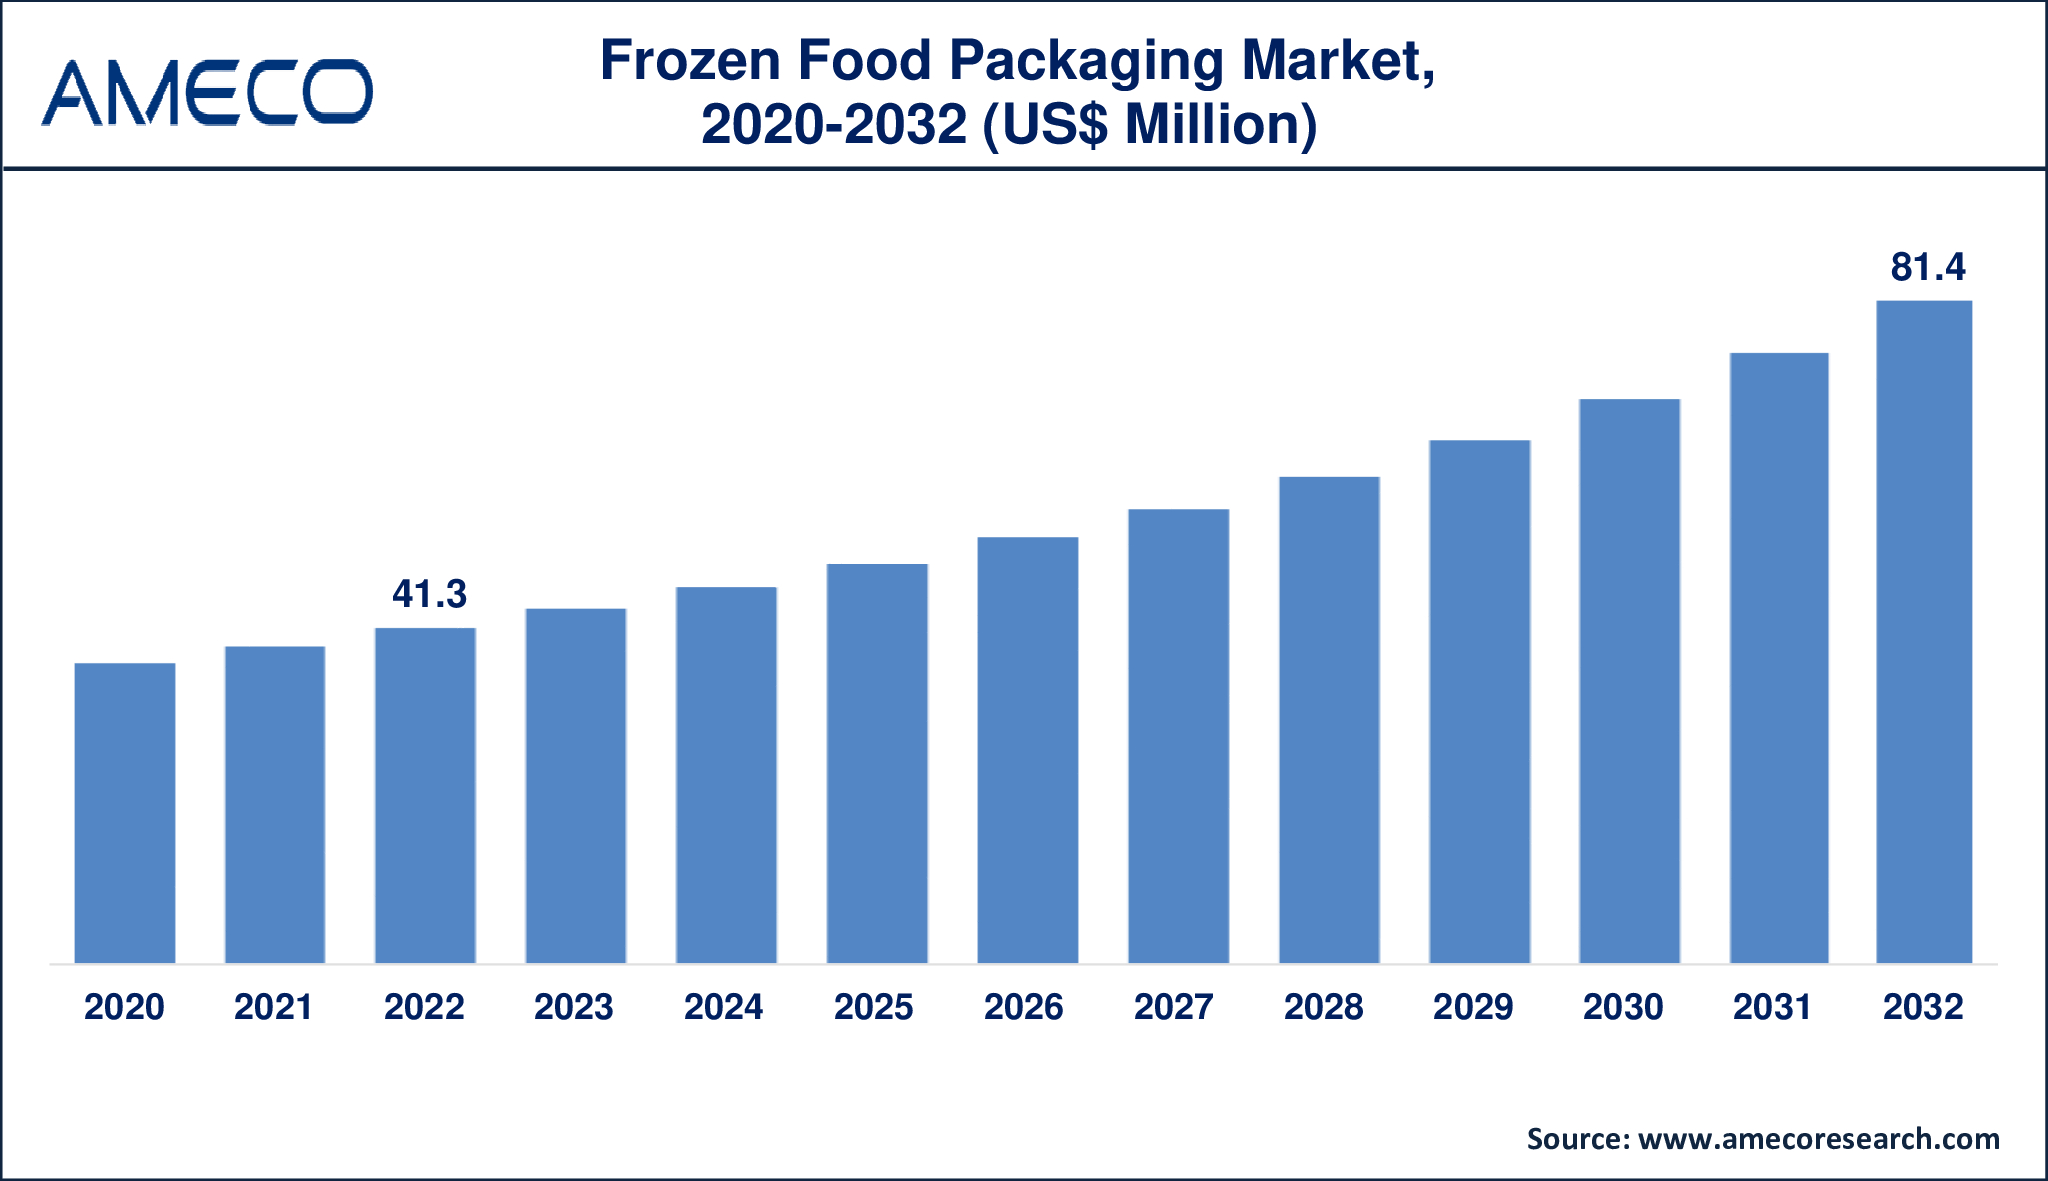 Frozen Foods  Sonoco Products Company